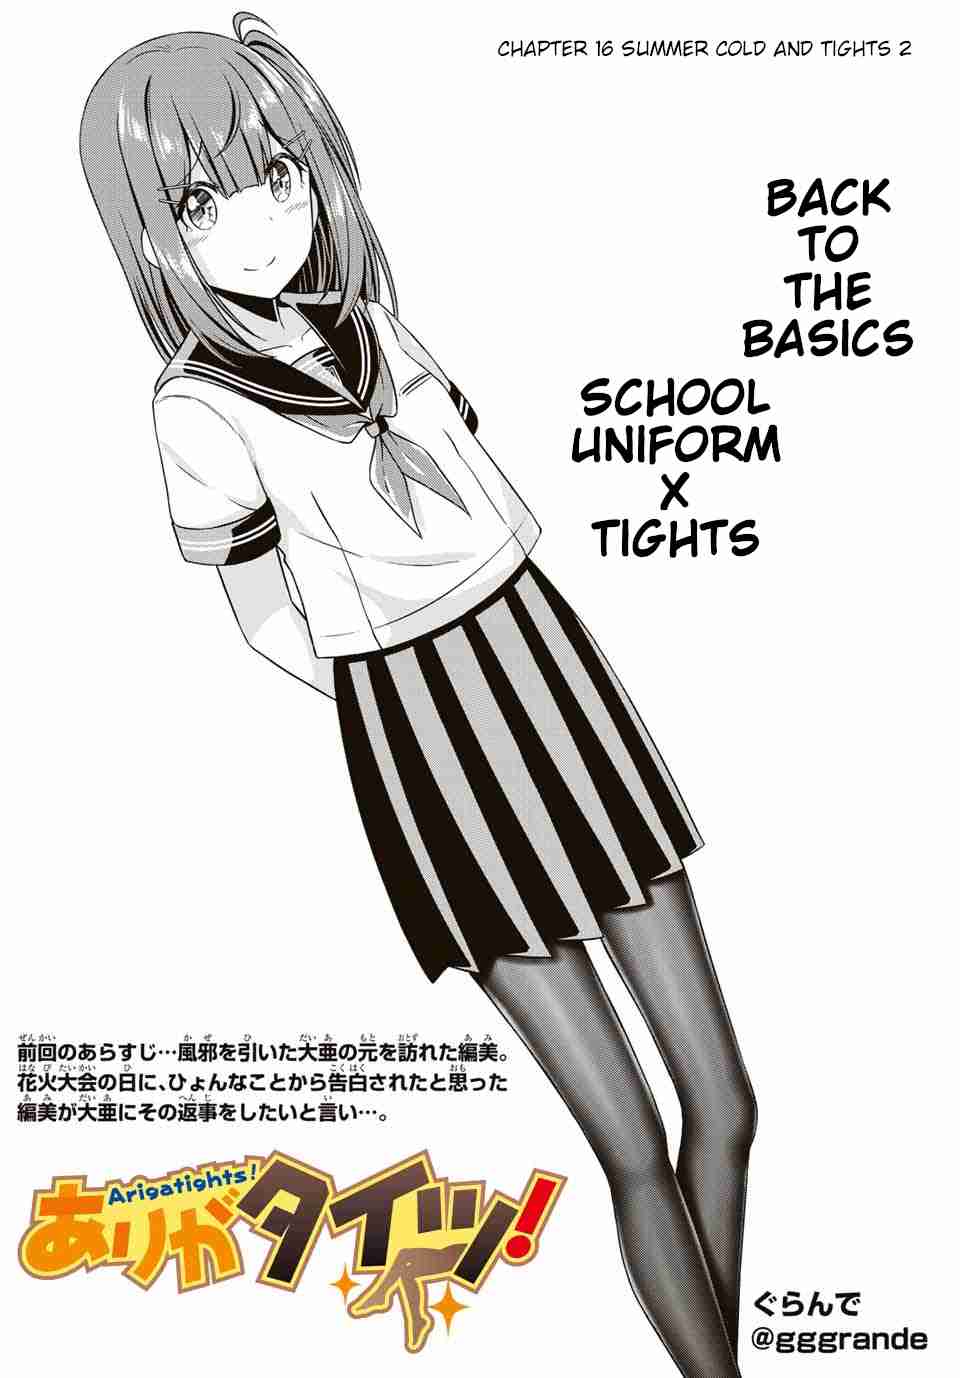 Arigatights! Ch. 16 Summer Cold and Tights 2